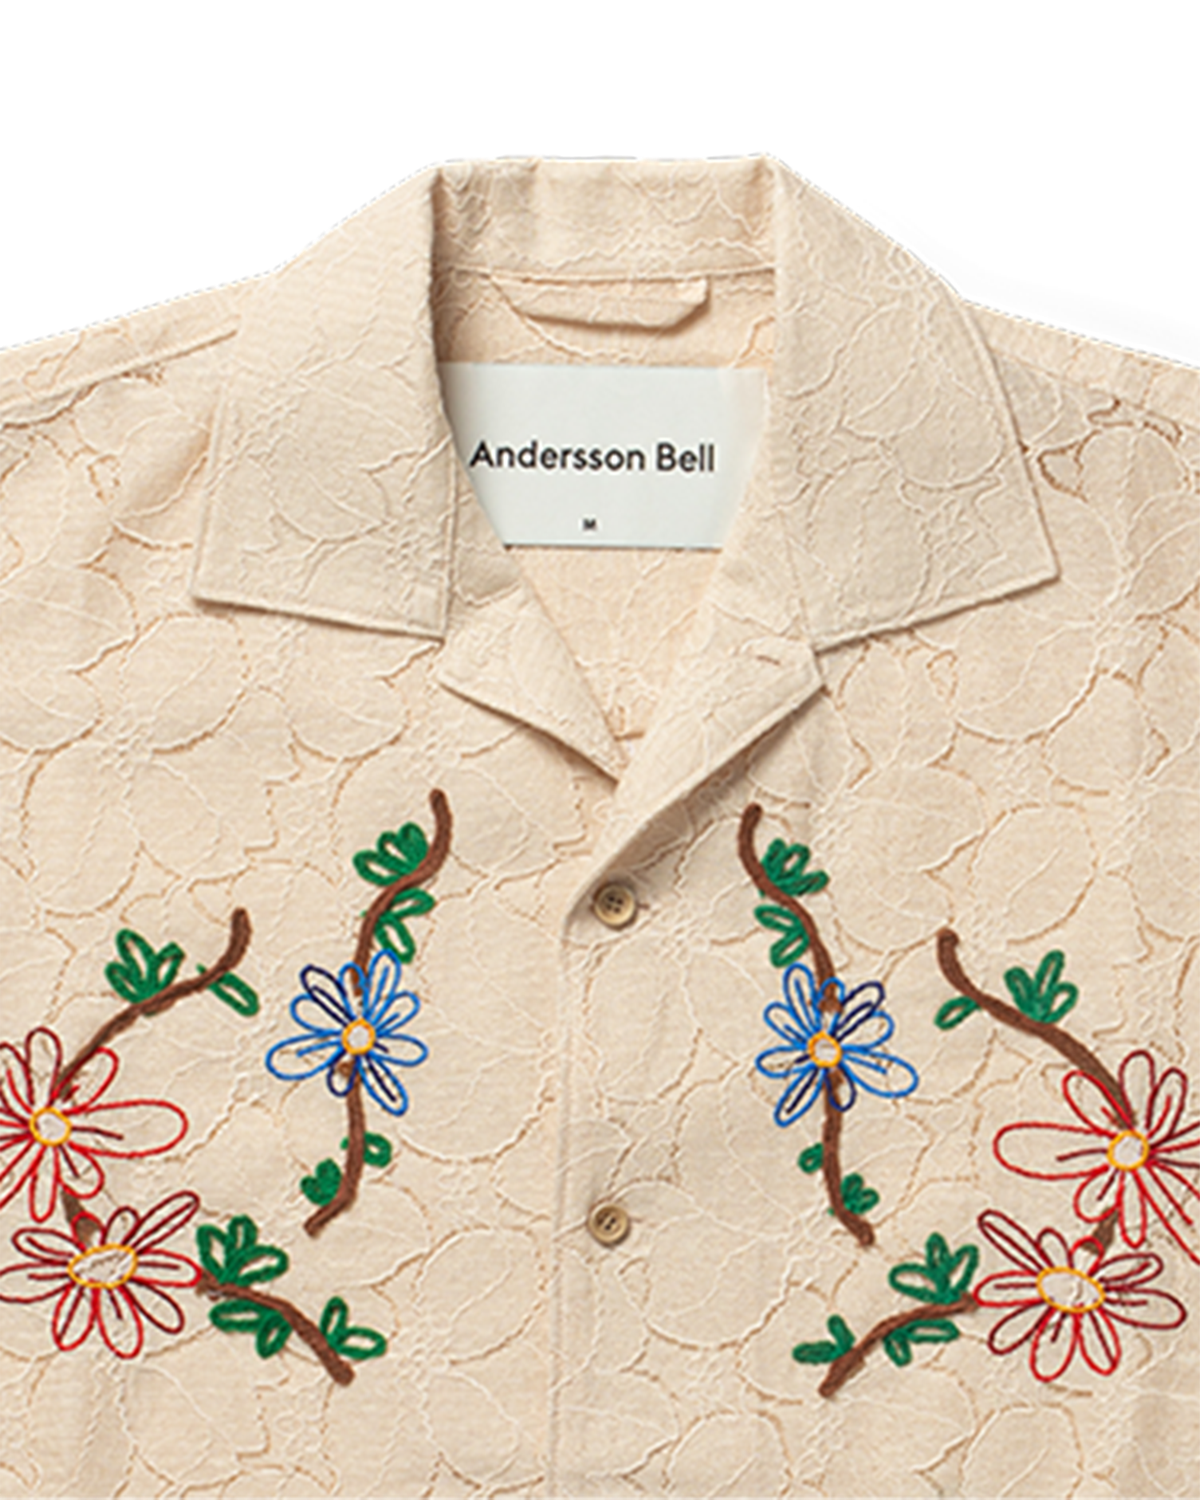 Flower Mushroom Embroidery Open Collar Shirts $429 Andersson Bell